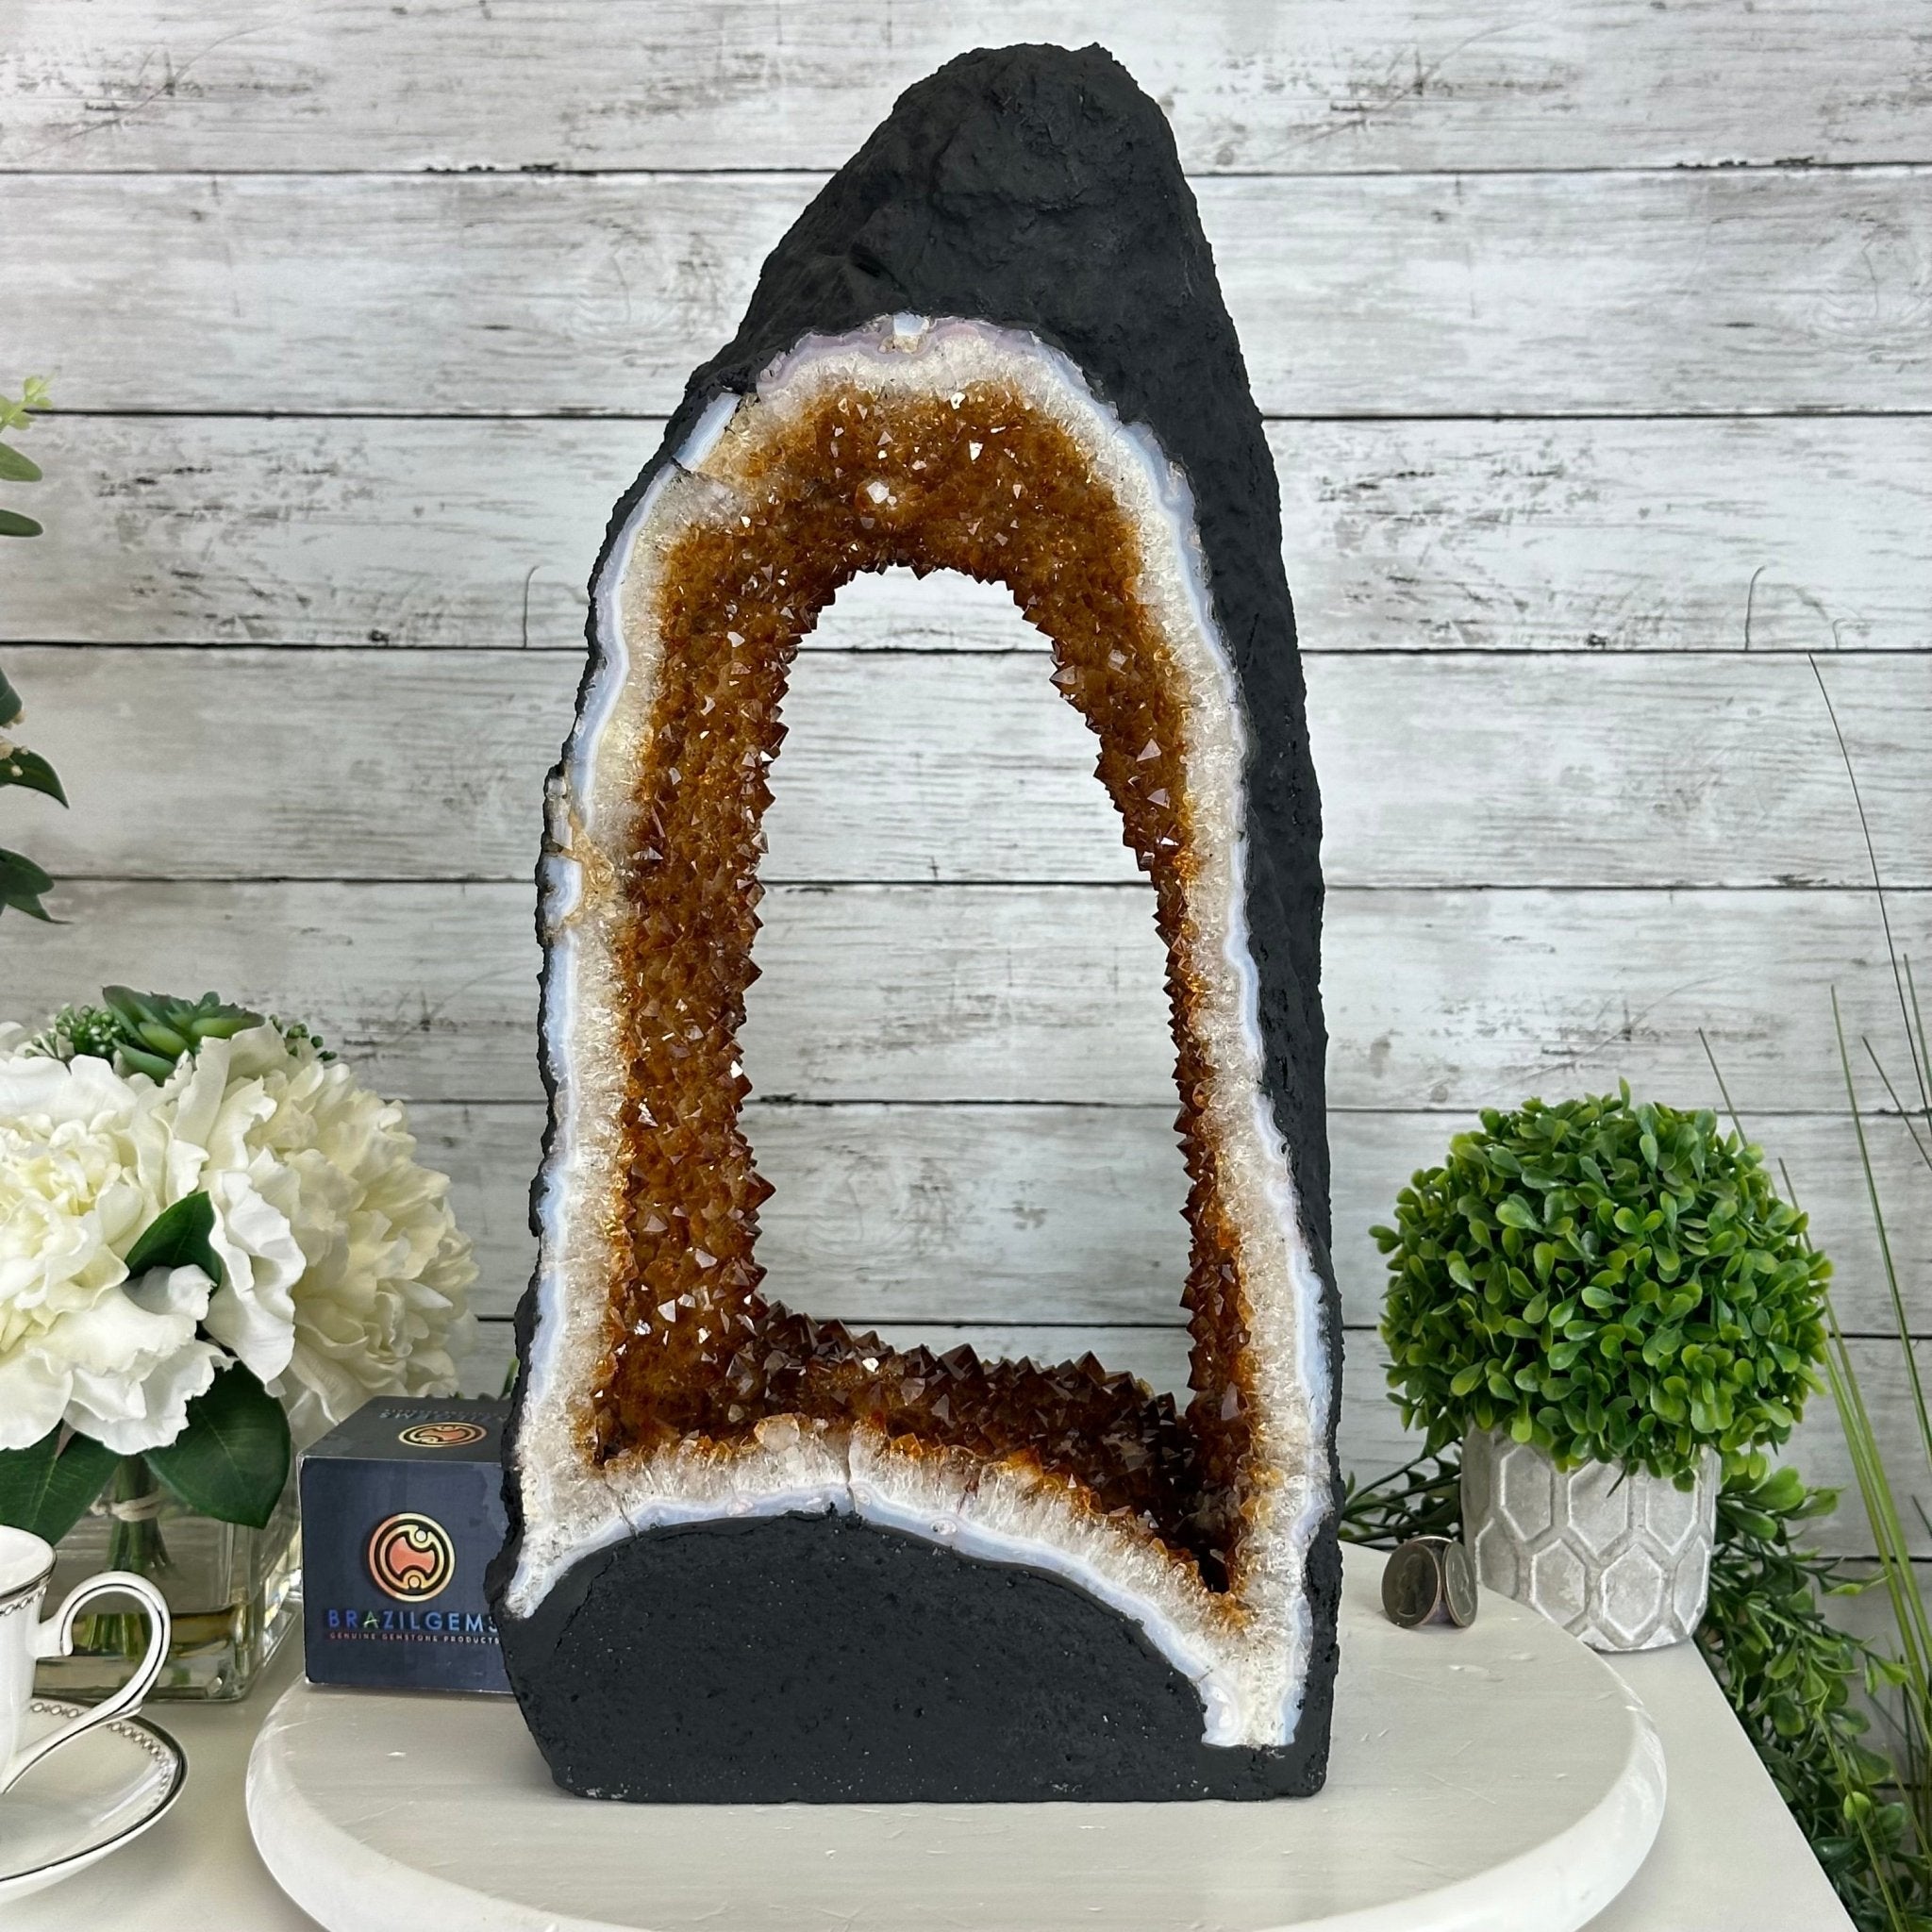 Quality Open 2 - Sided Brazilian Citrine Cathedral, 24.7 lbs and 17.5" Tall #5608 - 0045 - Brazil GemsBrazil GemsQuality Open 2 - Sided Brazilian Citrine Cathedral, 24.7 lbs and 17.5" Tall #5608 - 0045Open 2 - Sided Cathedrals5608 - 0045